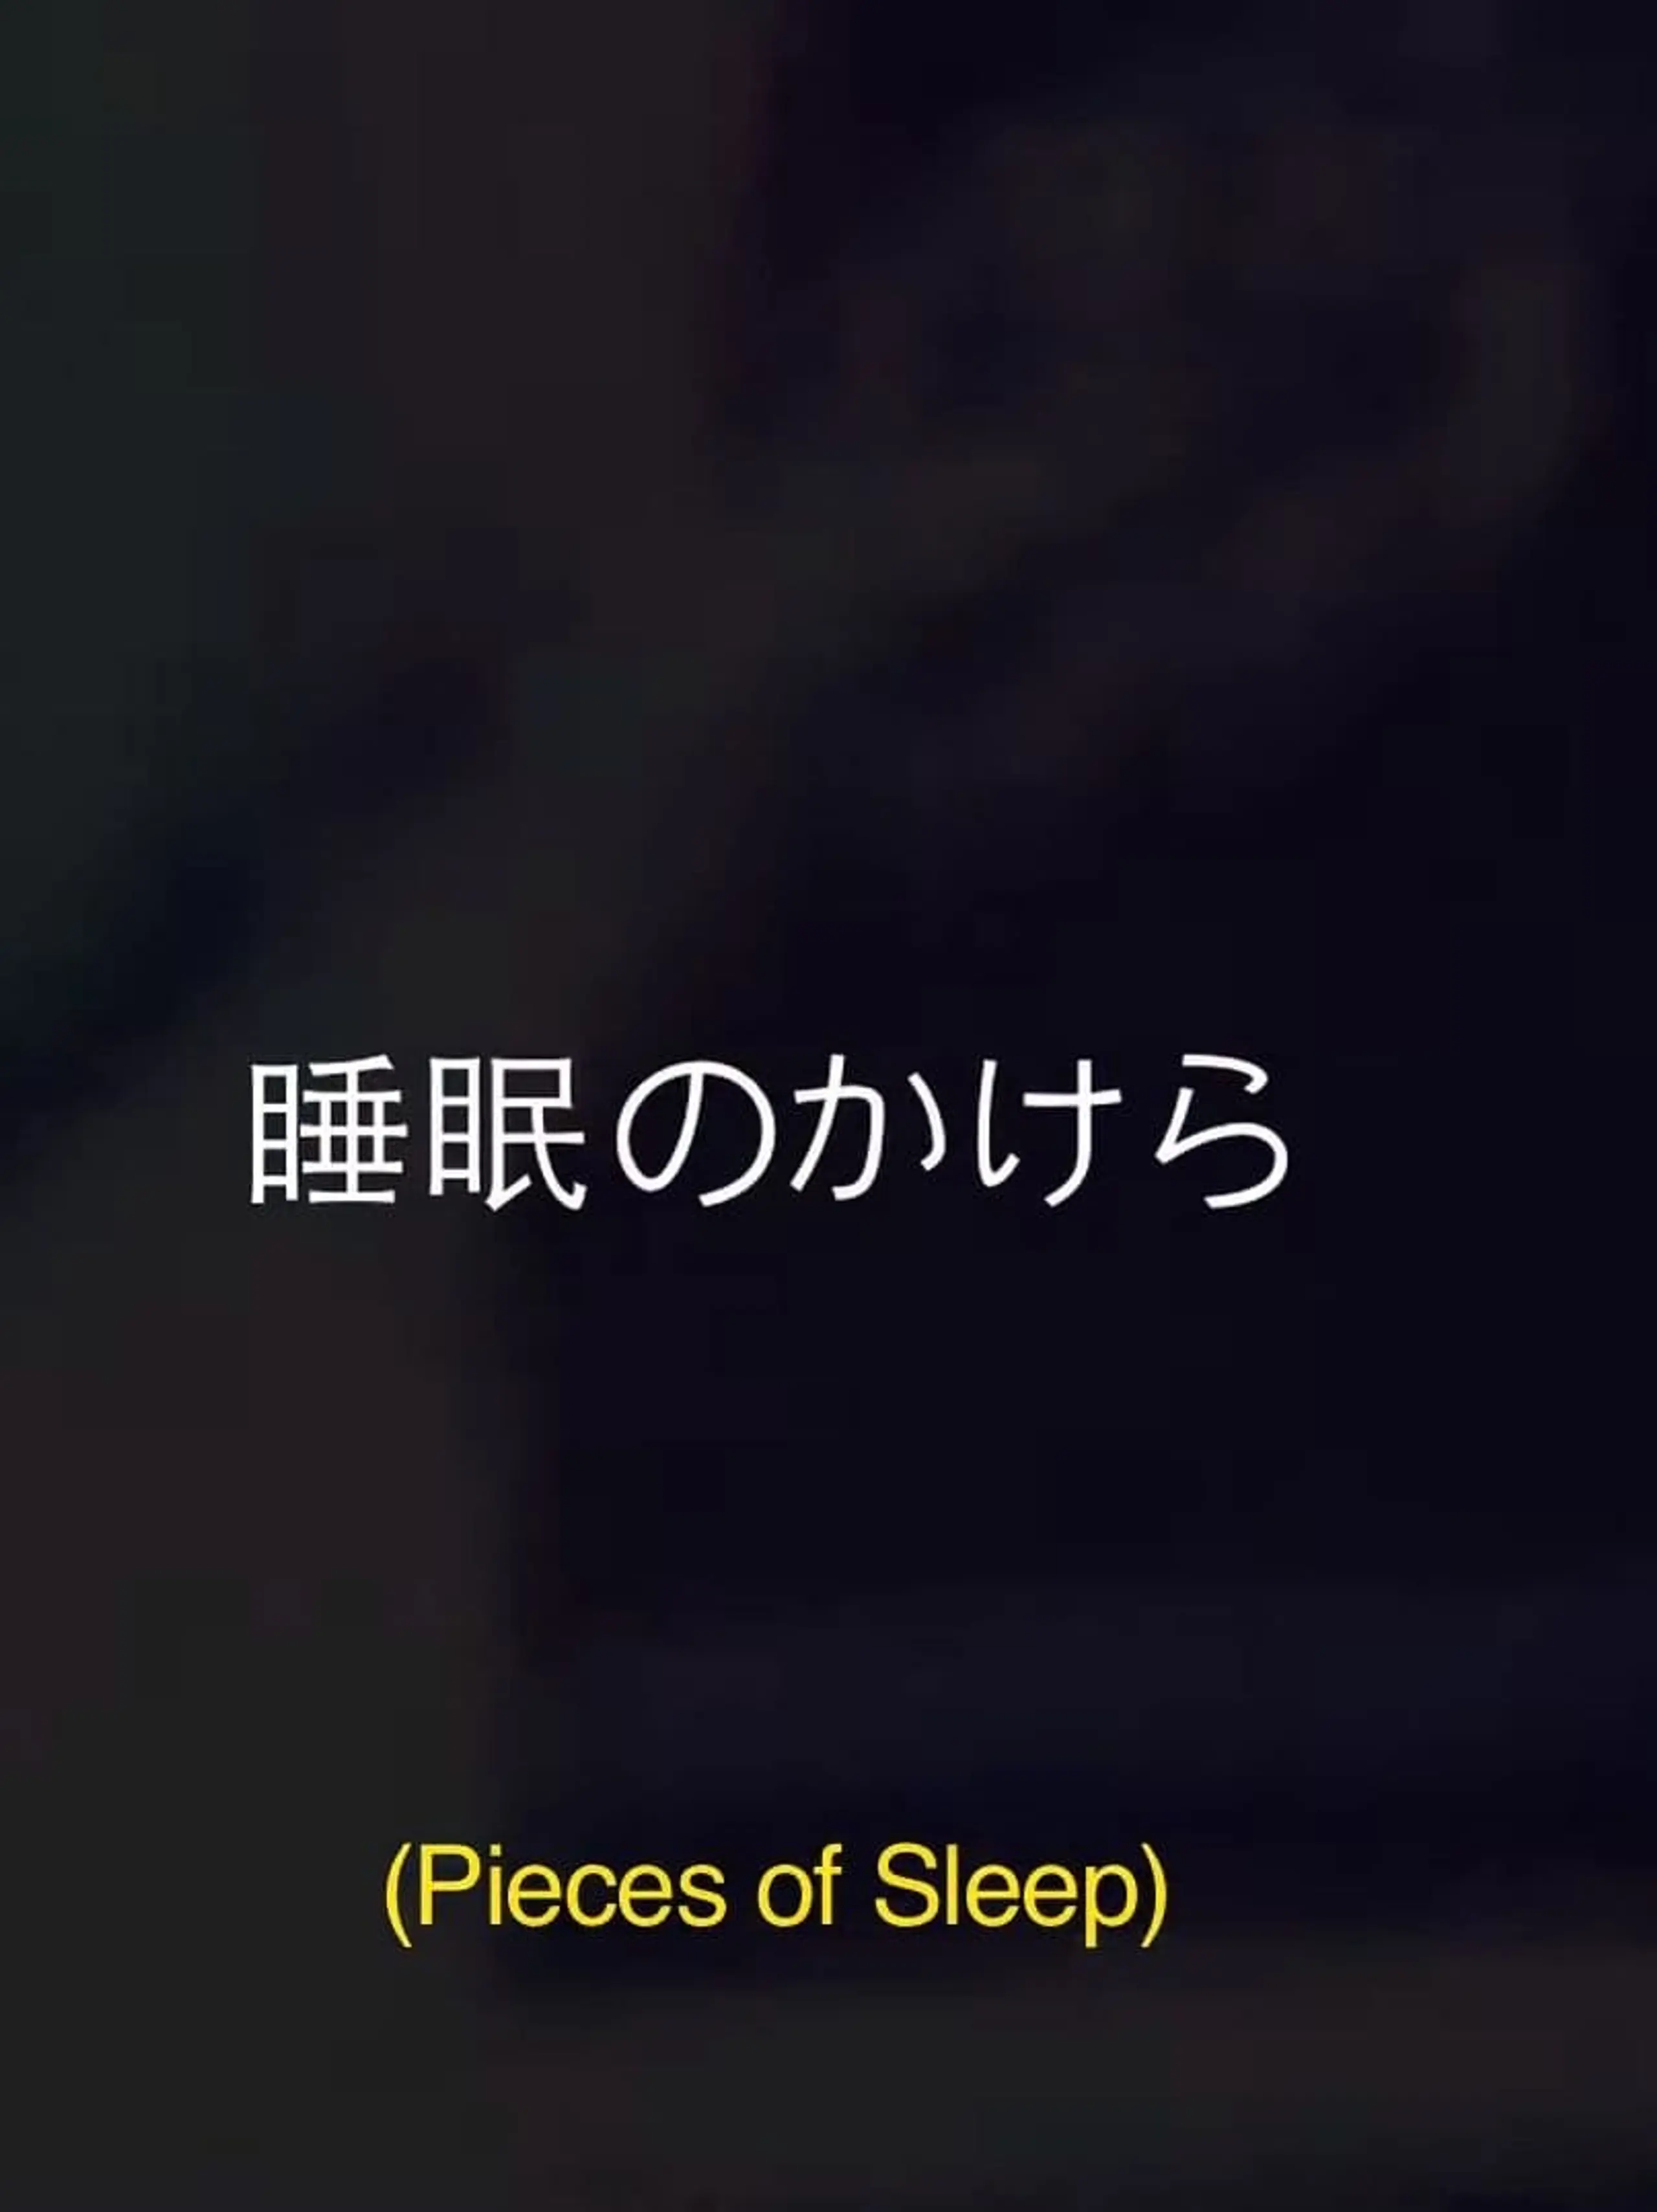 Pieces Of Sleep: The 1993 Japan Tour Re-Imagined